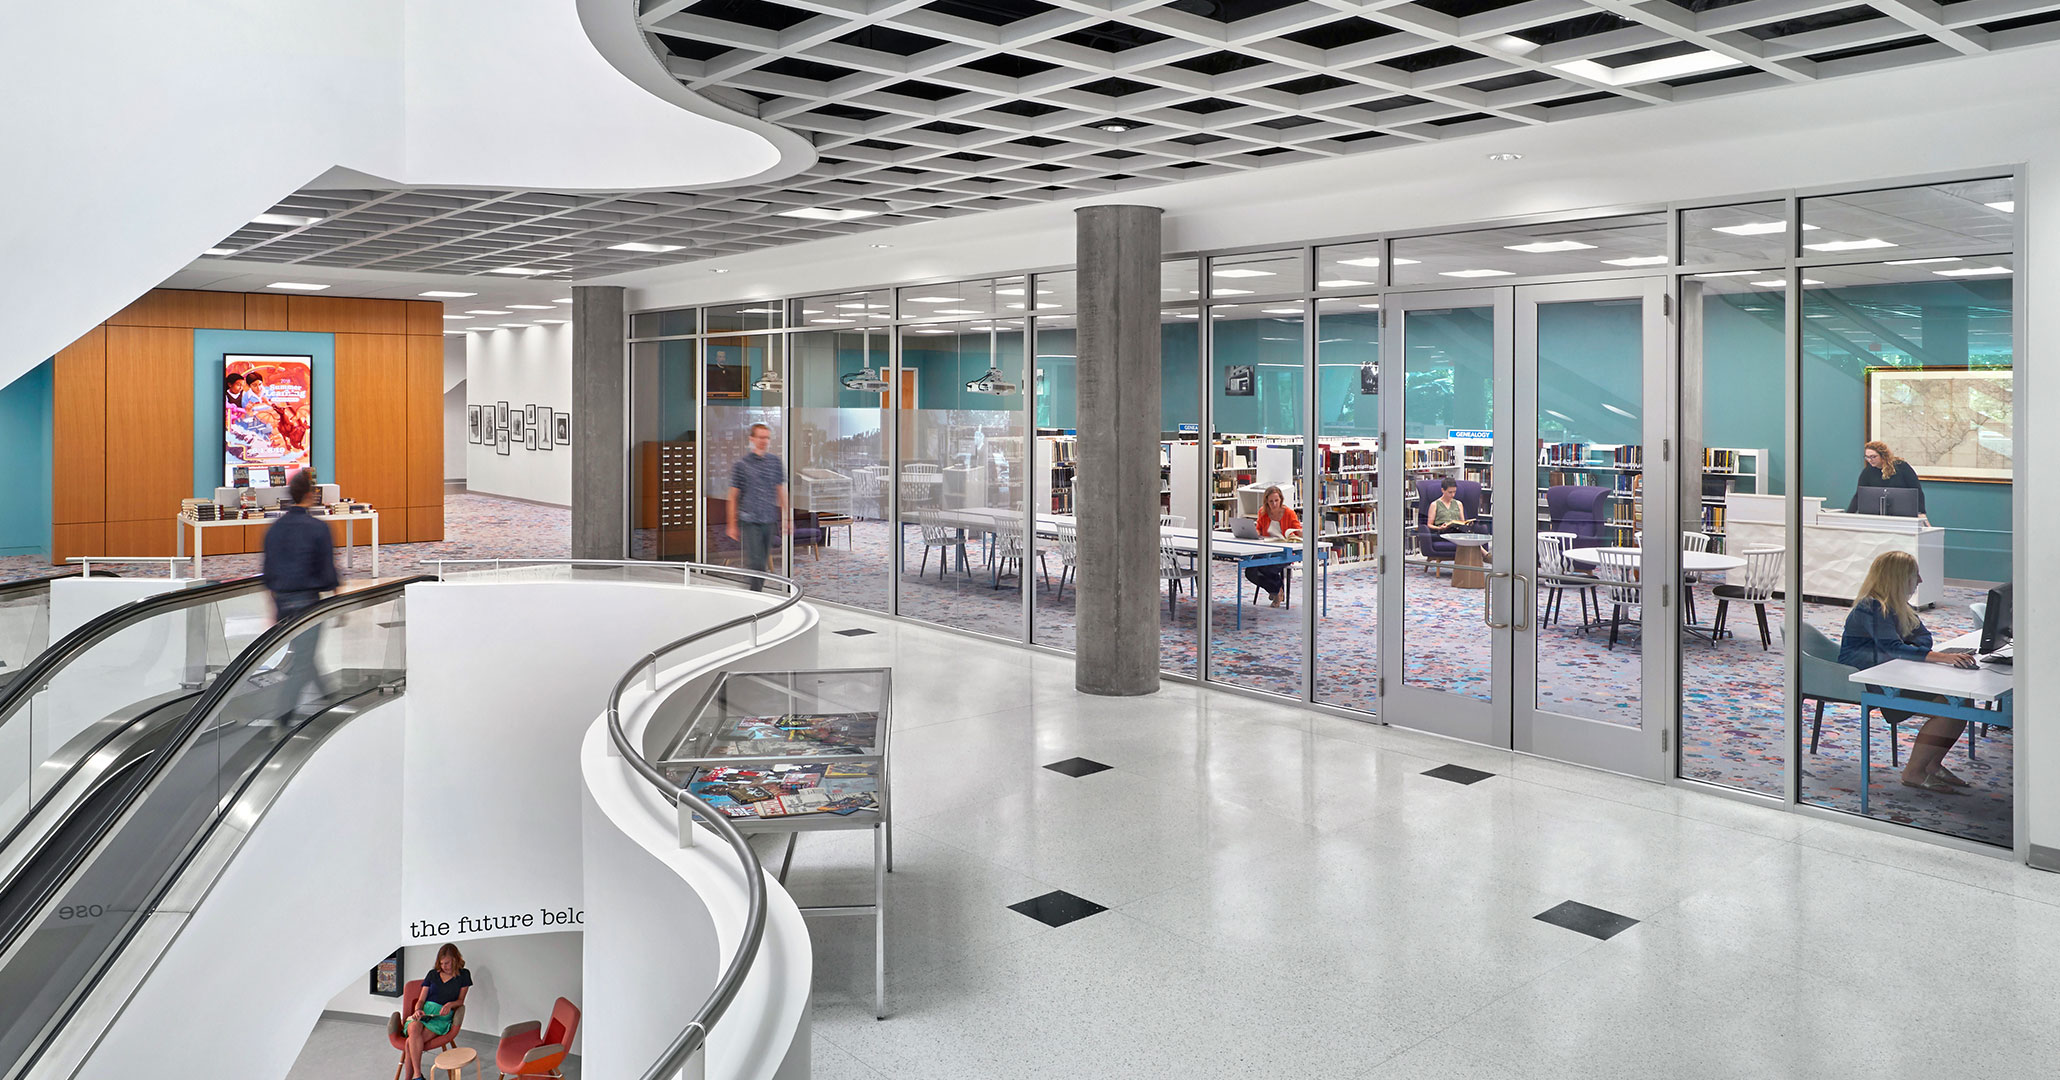 Richland County Library worked with Boudreaux architects to design high end spaces.